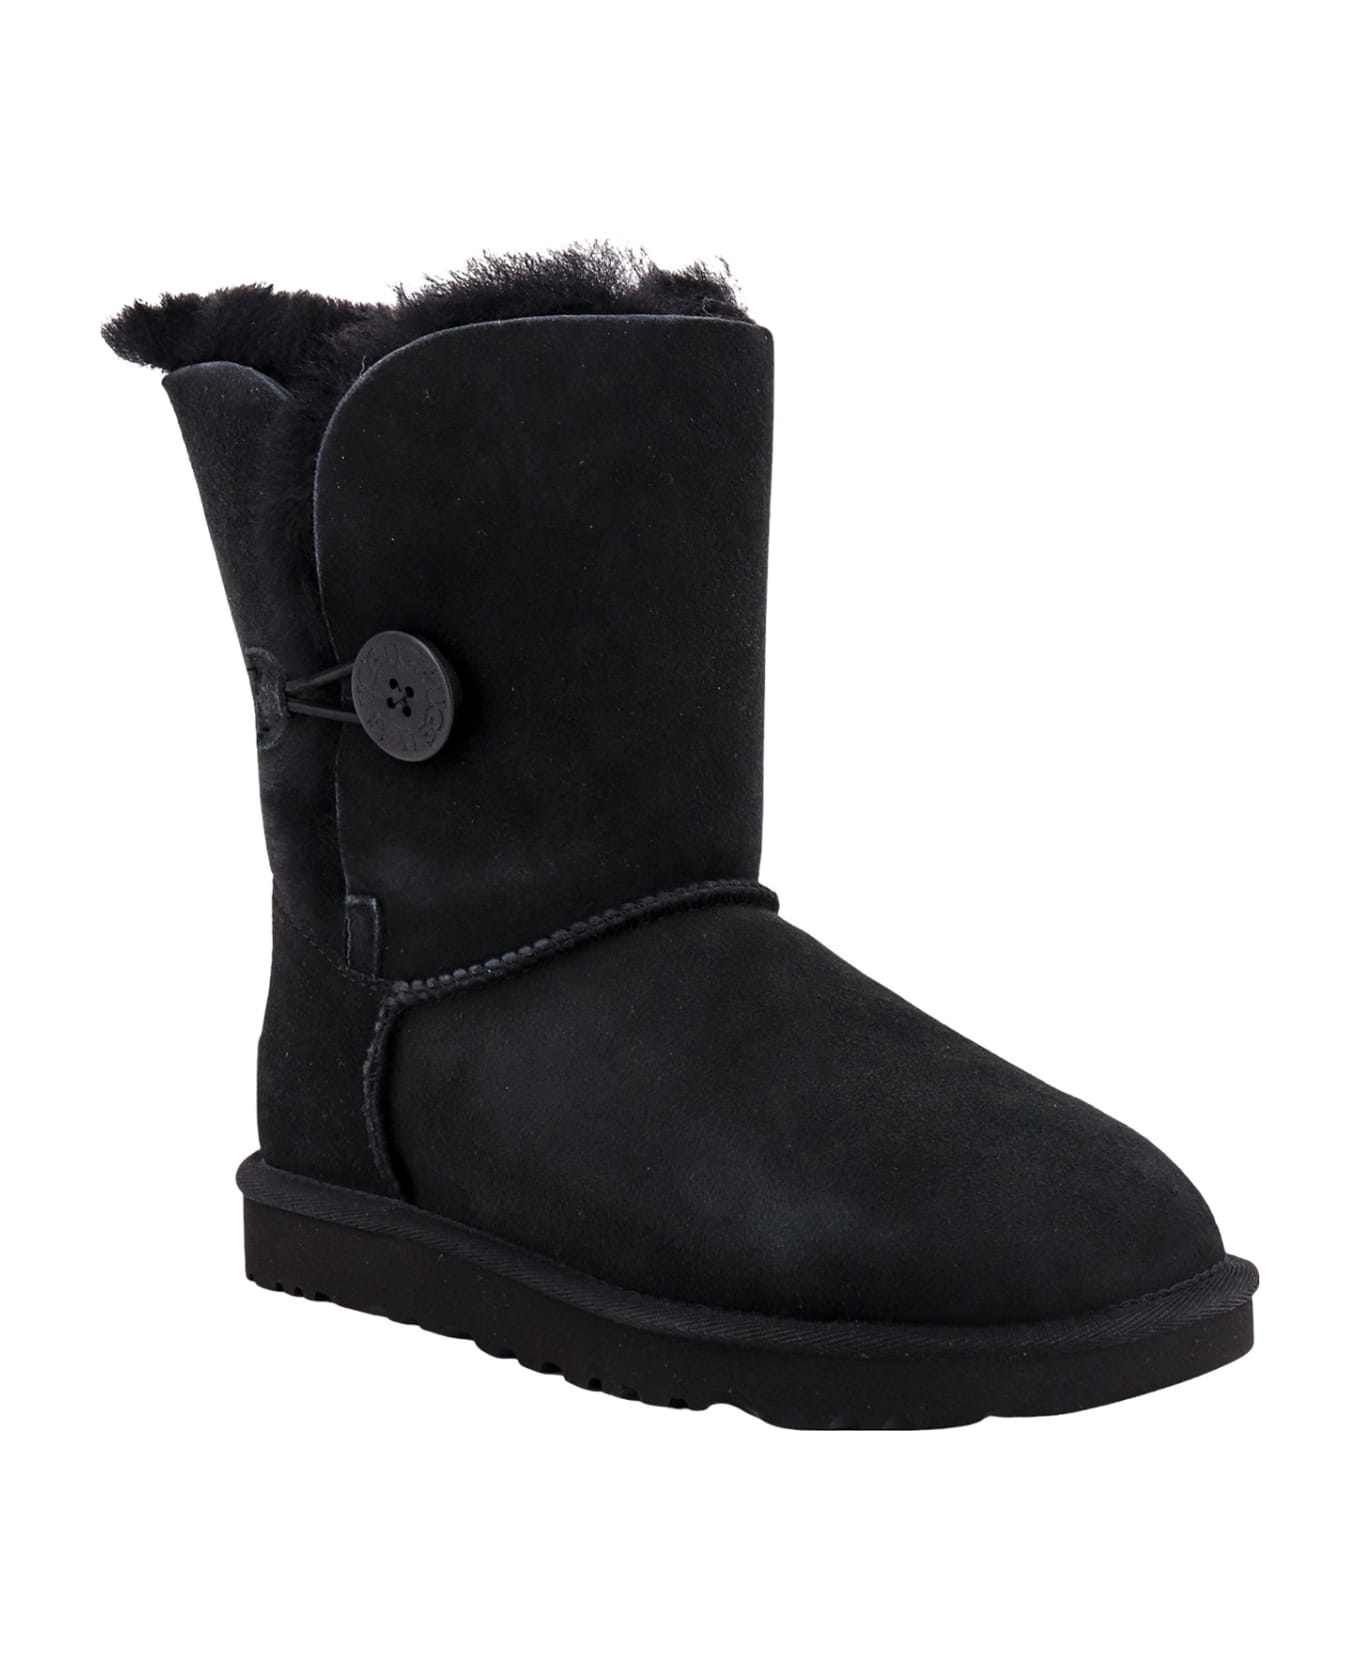 UGG Bailey Button Boots - Black